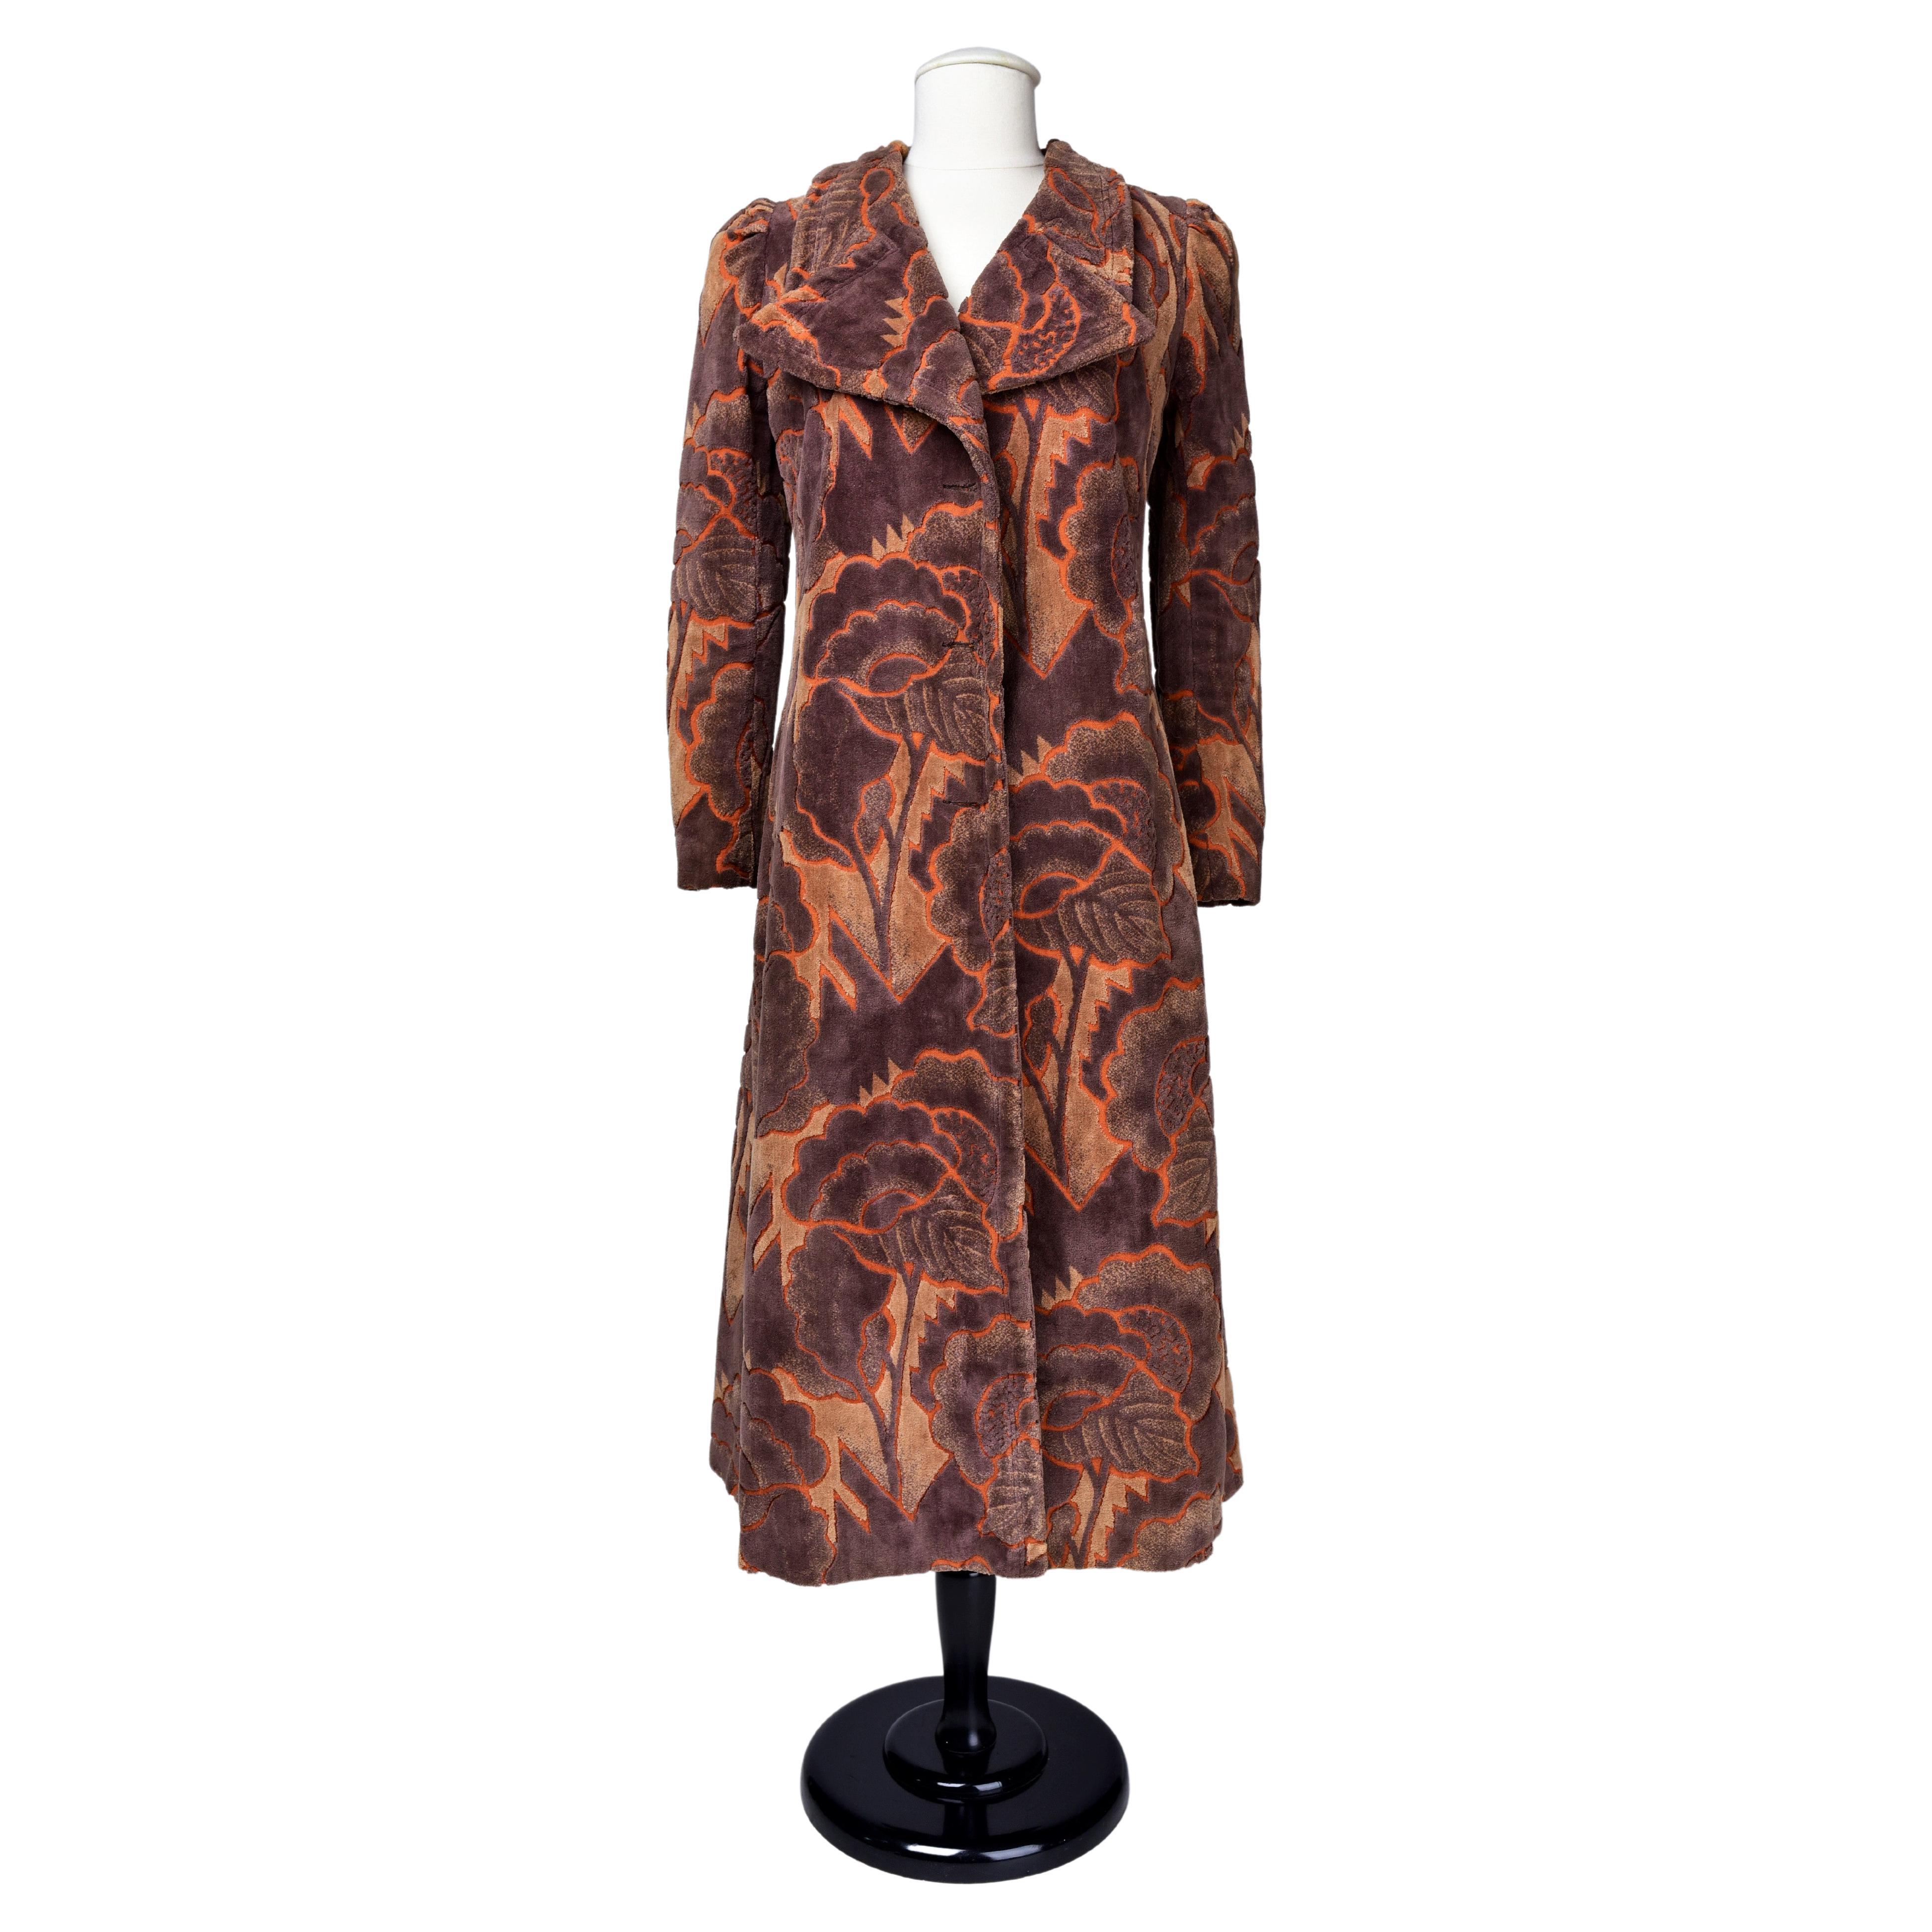 A French Art Deco Velvet Day Coat in the style of Raoul Dufy Circa 1939-1942